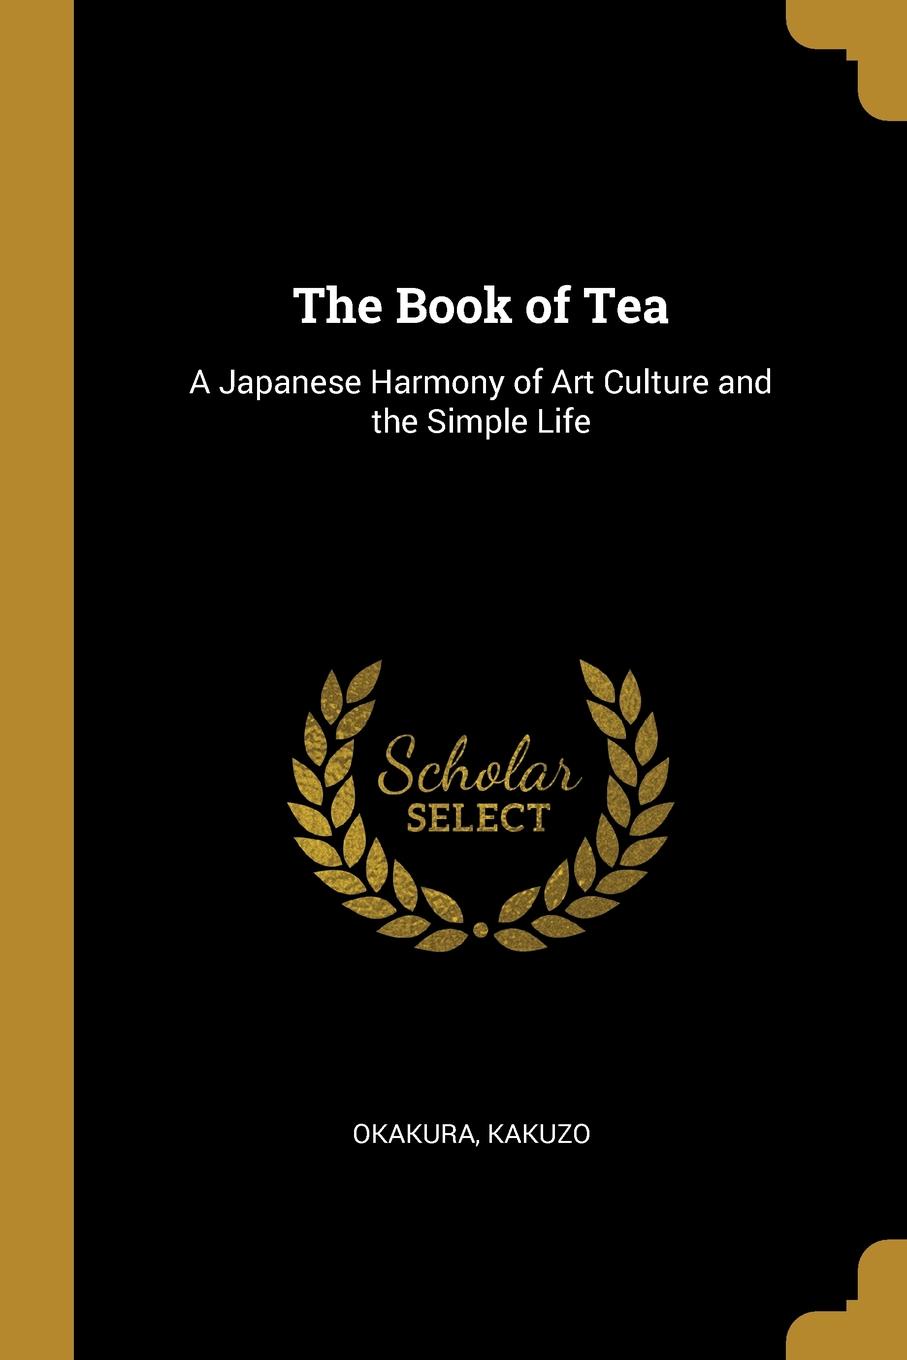 The Book of Tea. A Japanese Harmony of Art Culture and the Simple Life